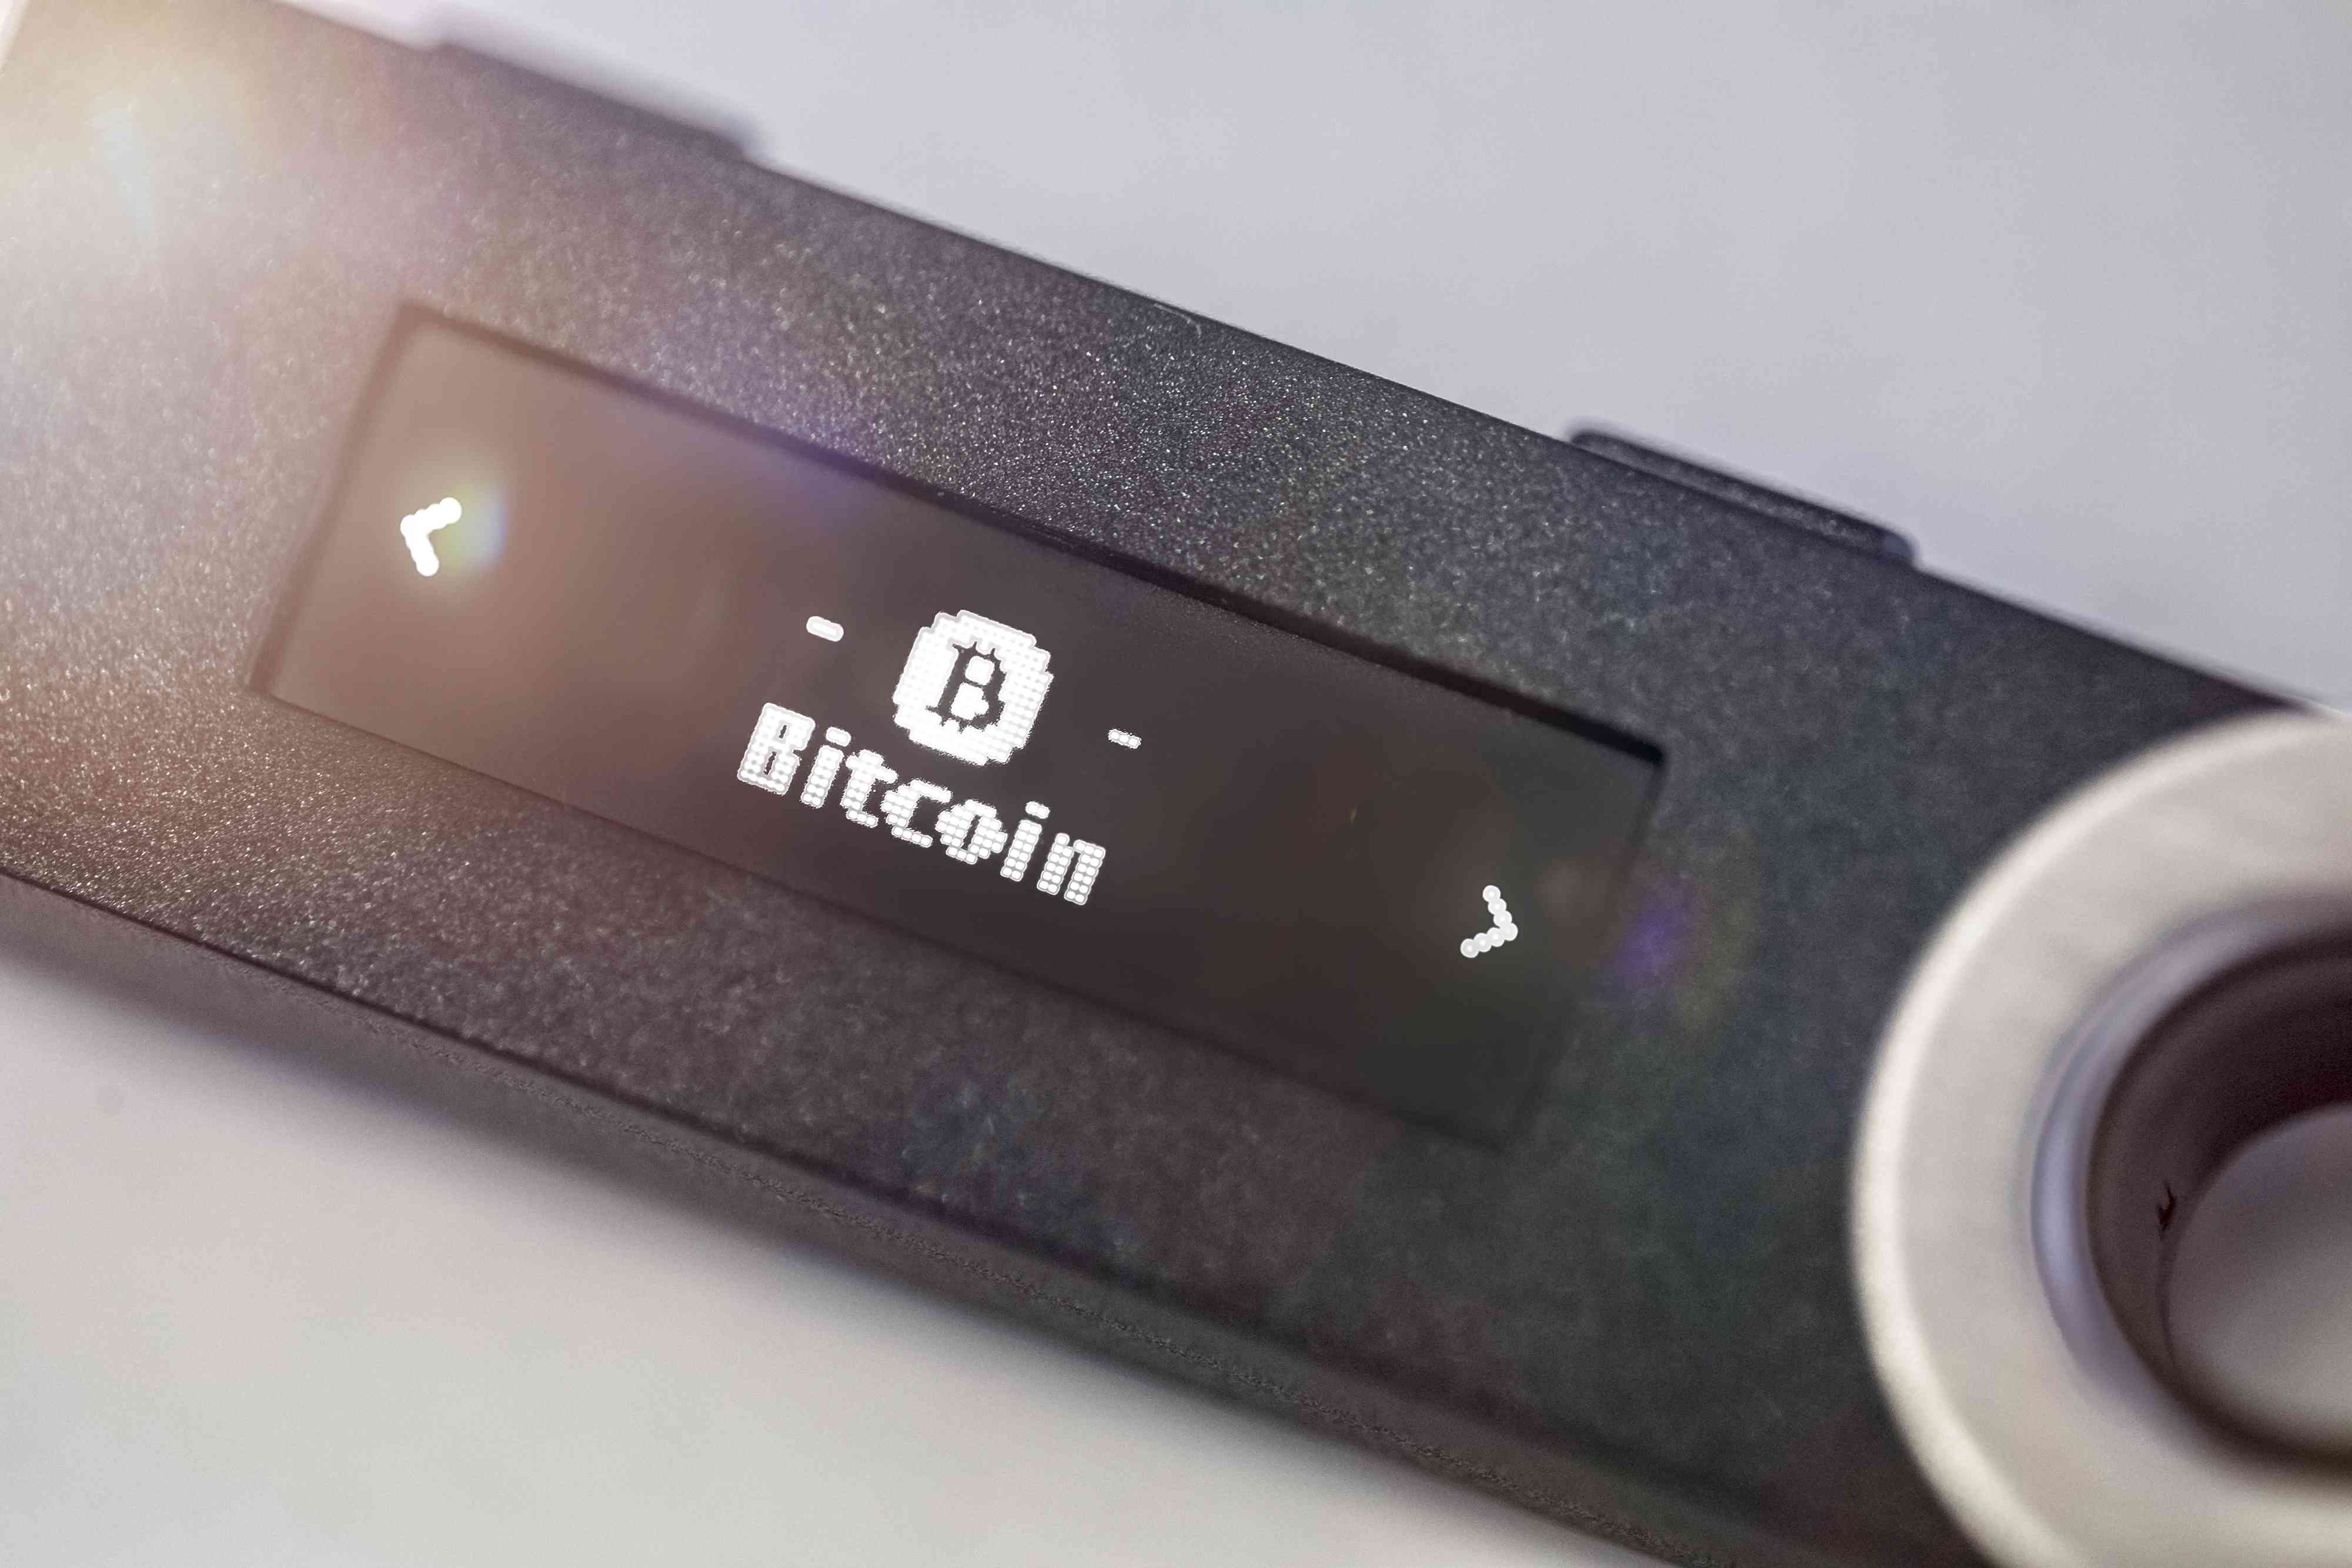 A digital hardware wallet for storing bitcoin